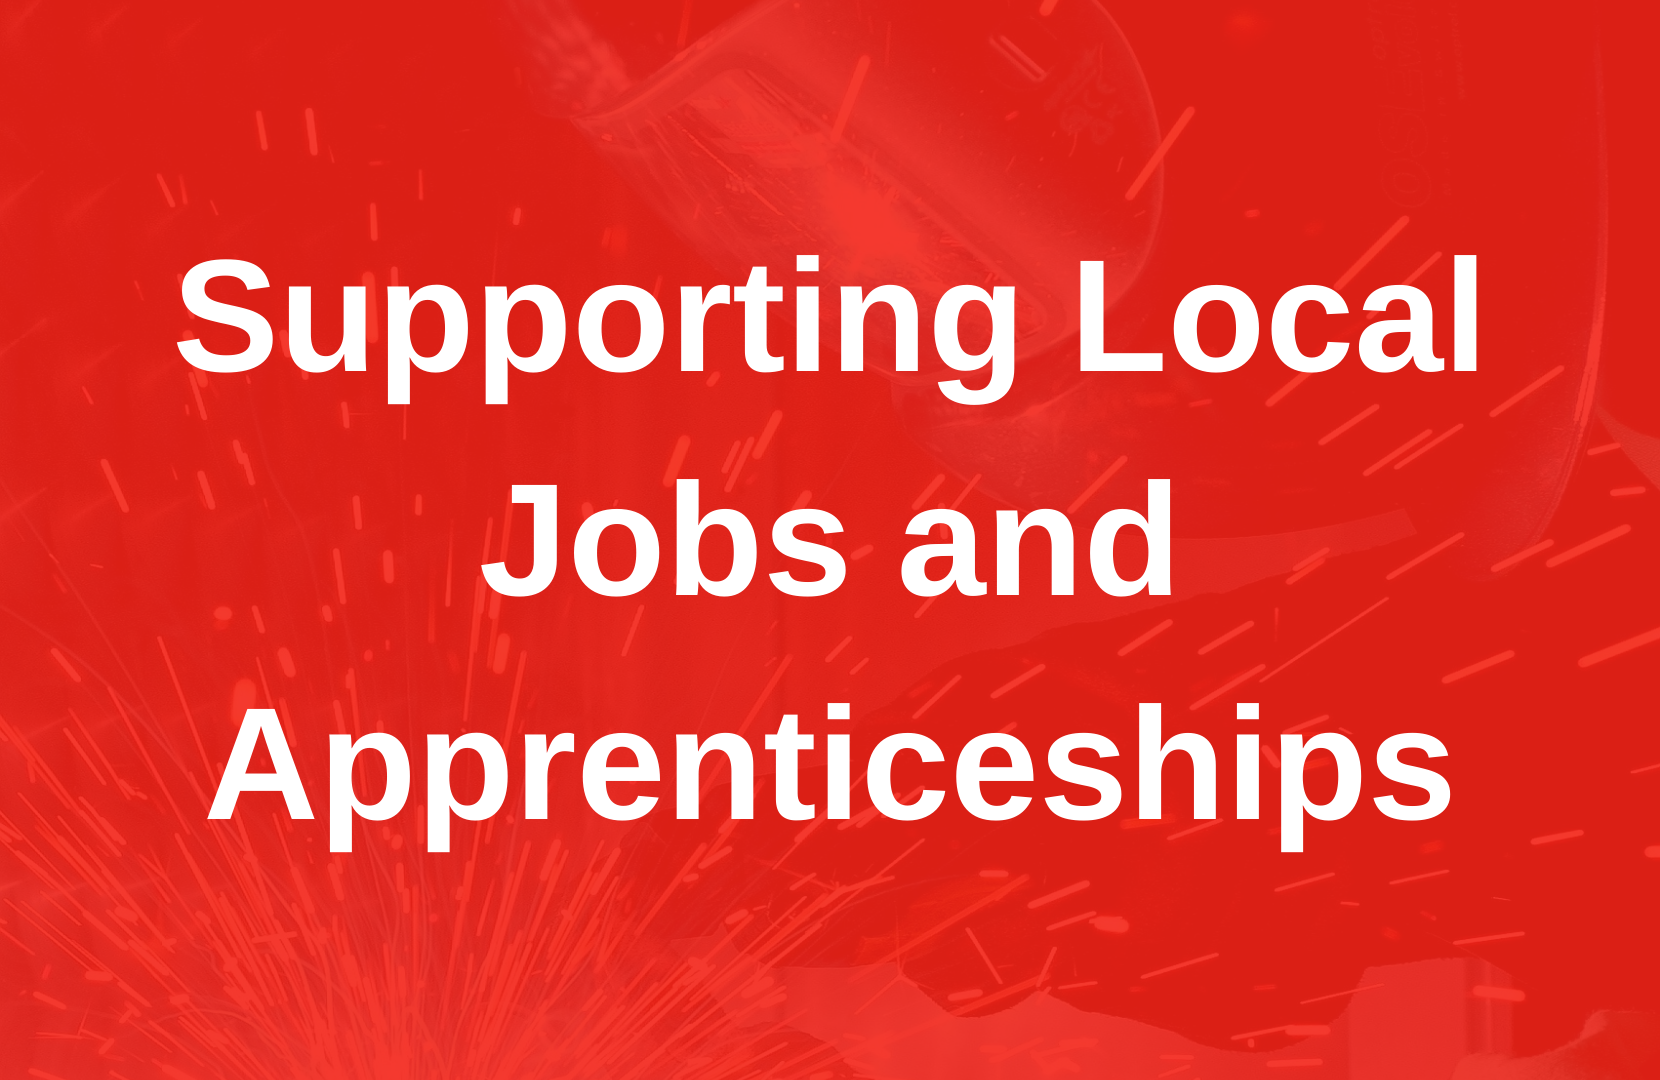 Jobs and Apprenticeships